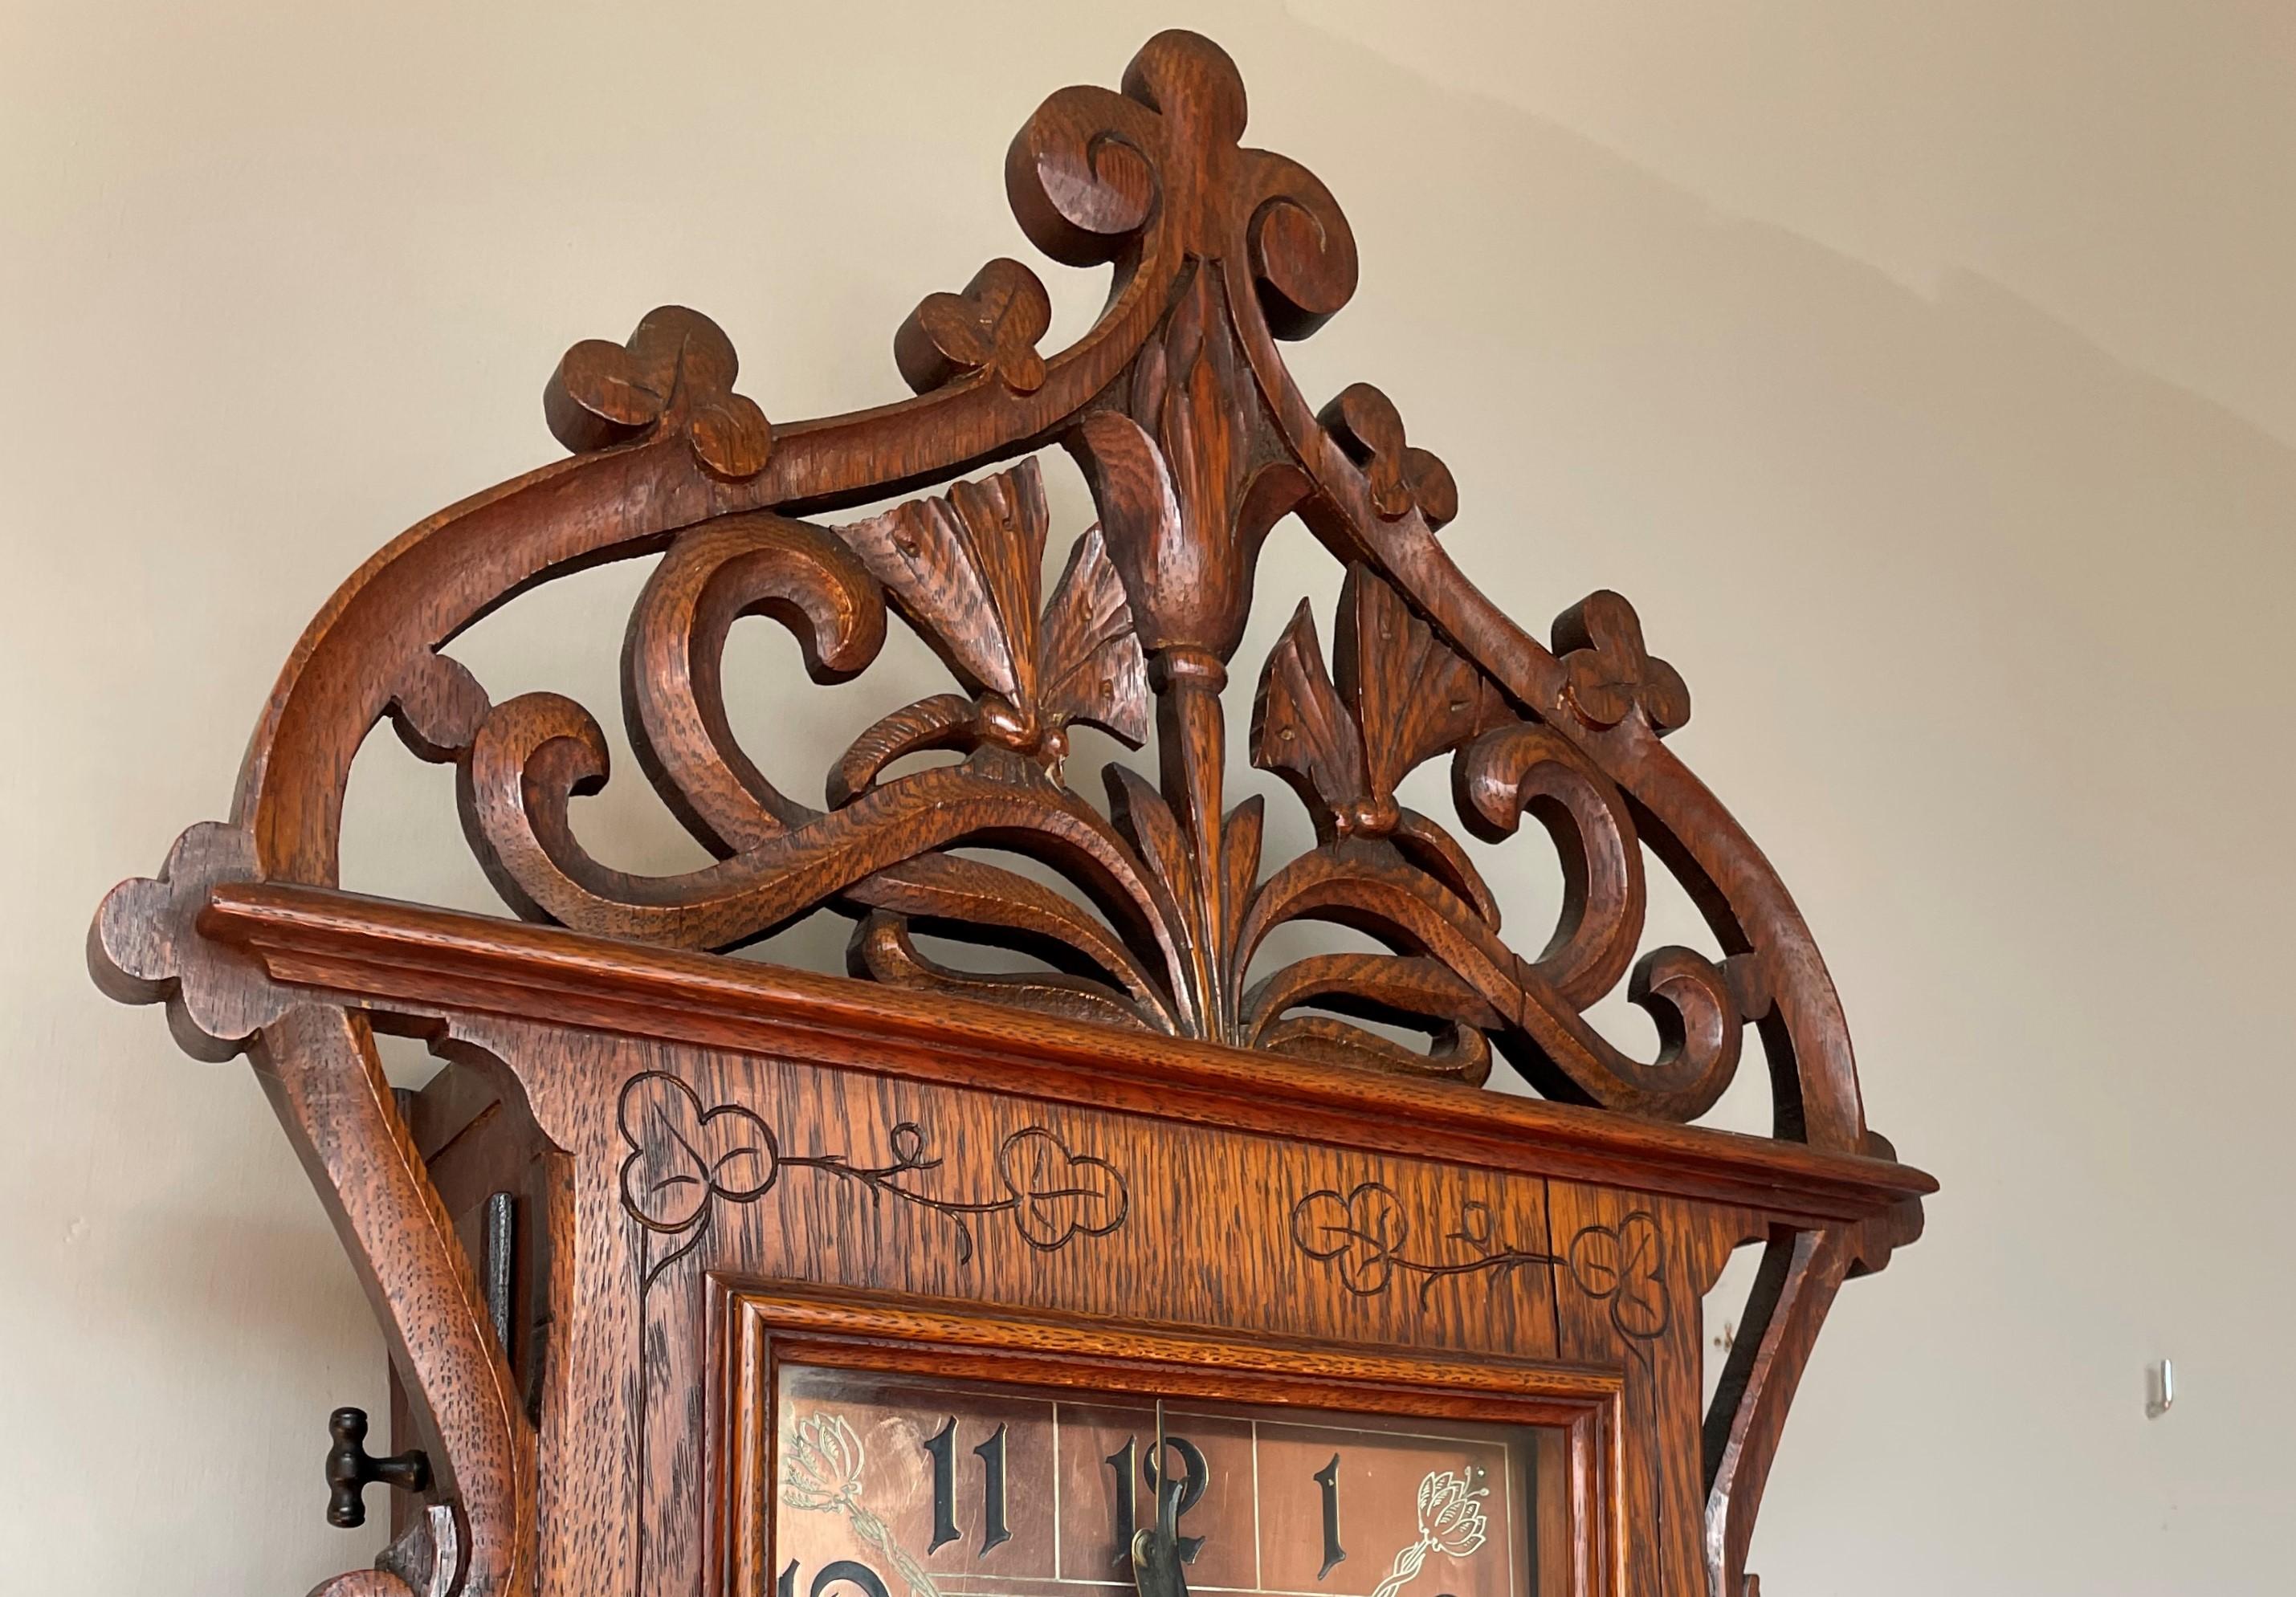 Polished Antique Gothic Revival Wall Clock w. Trefoil, Holy Light & Butterfly Sculptures